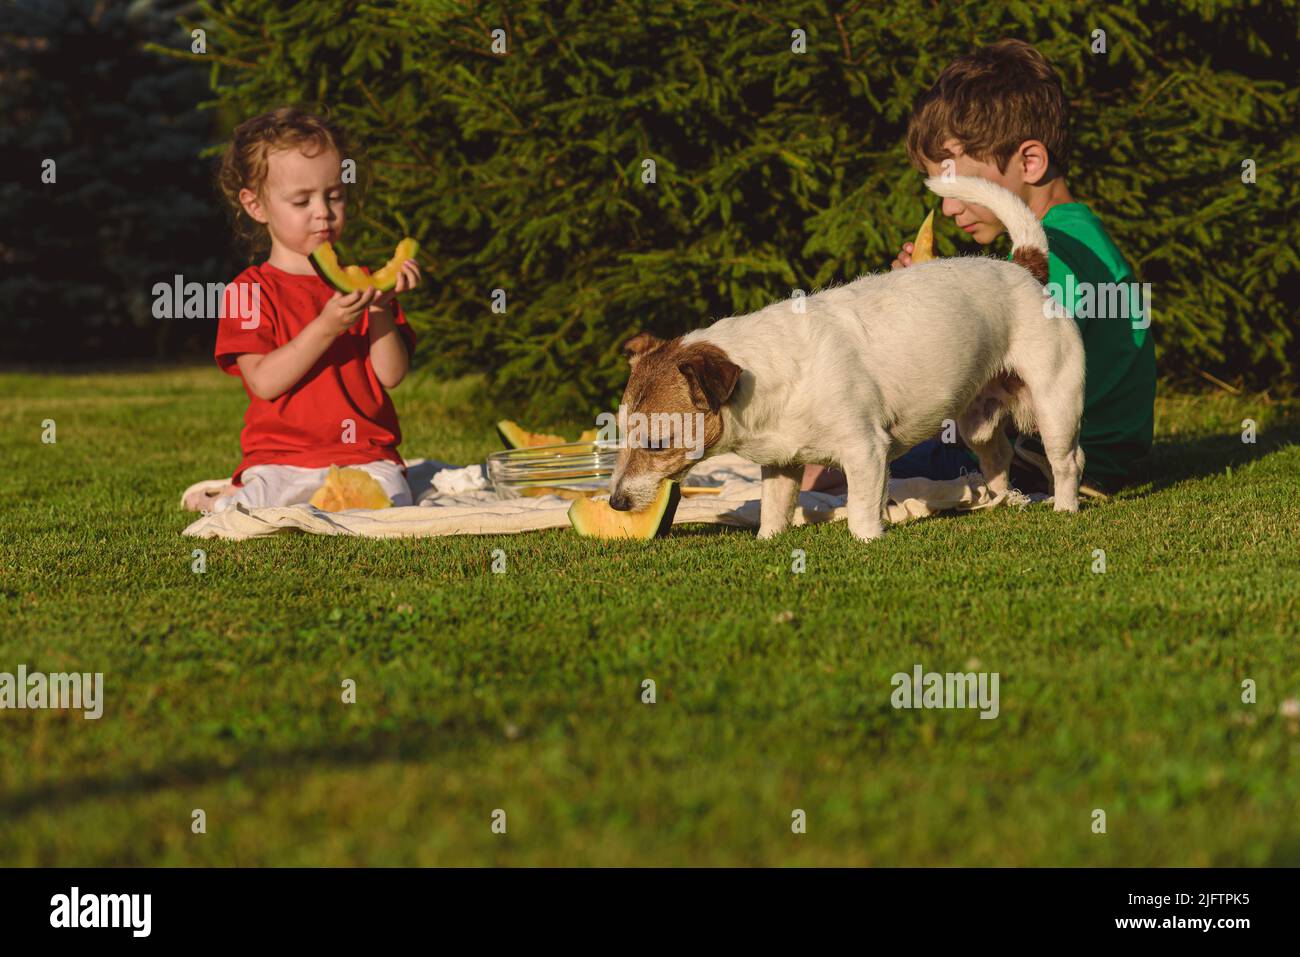 Children having picnic outdoors eating yellow watermelon on grass and treating their dog with big slice of fruit Stock Photo